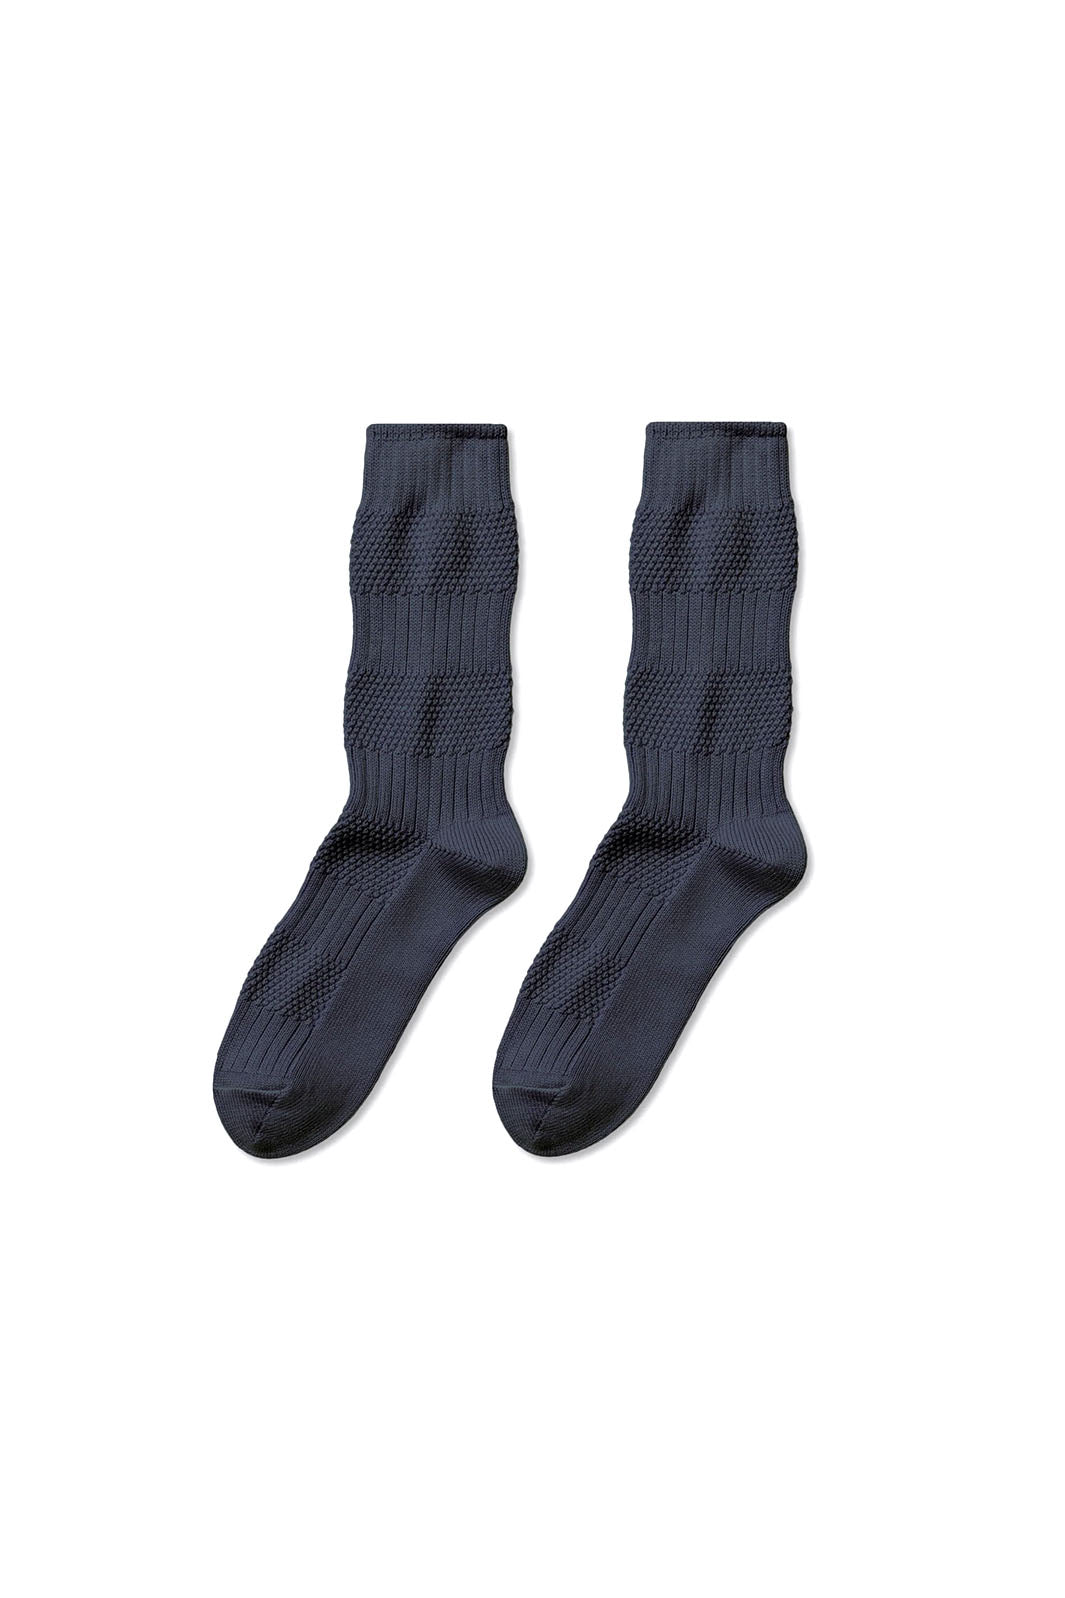 Navy blue knit textured socks with vertical and horizontal knitting pattern by Far Afield. 